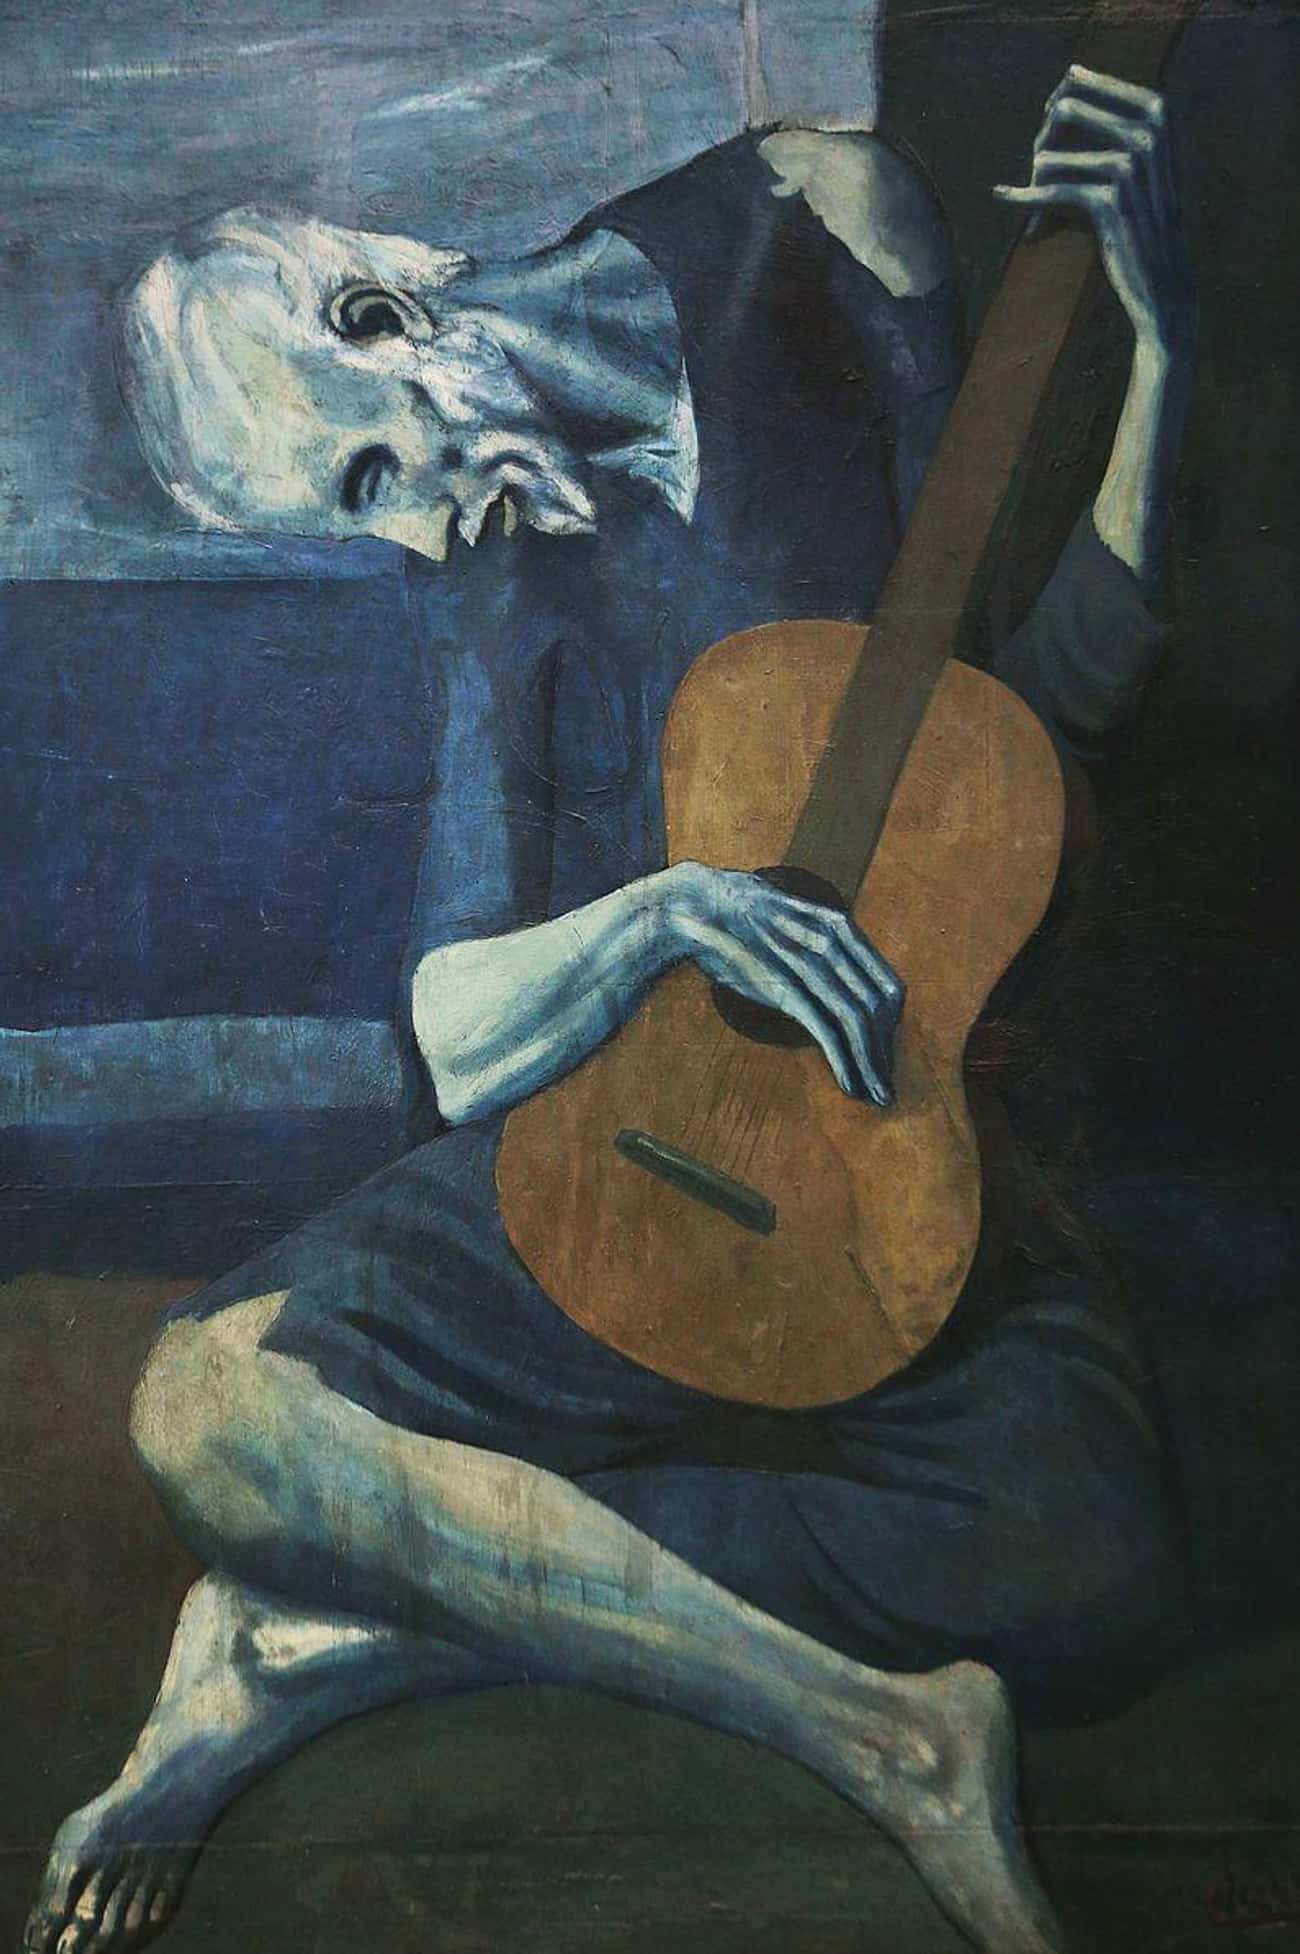 Picasso's 'The Old Guitarist' Covers Up Two Hidden Paintings